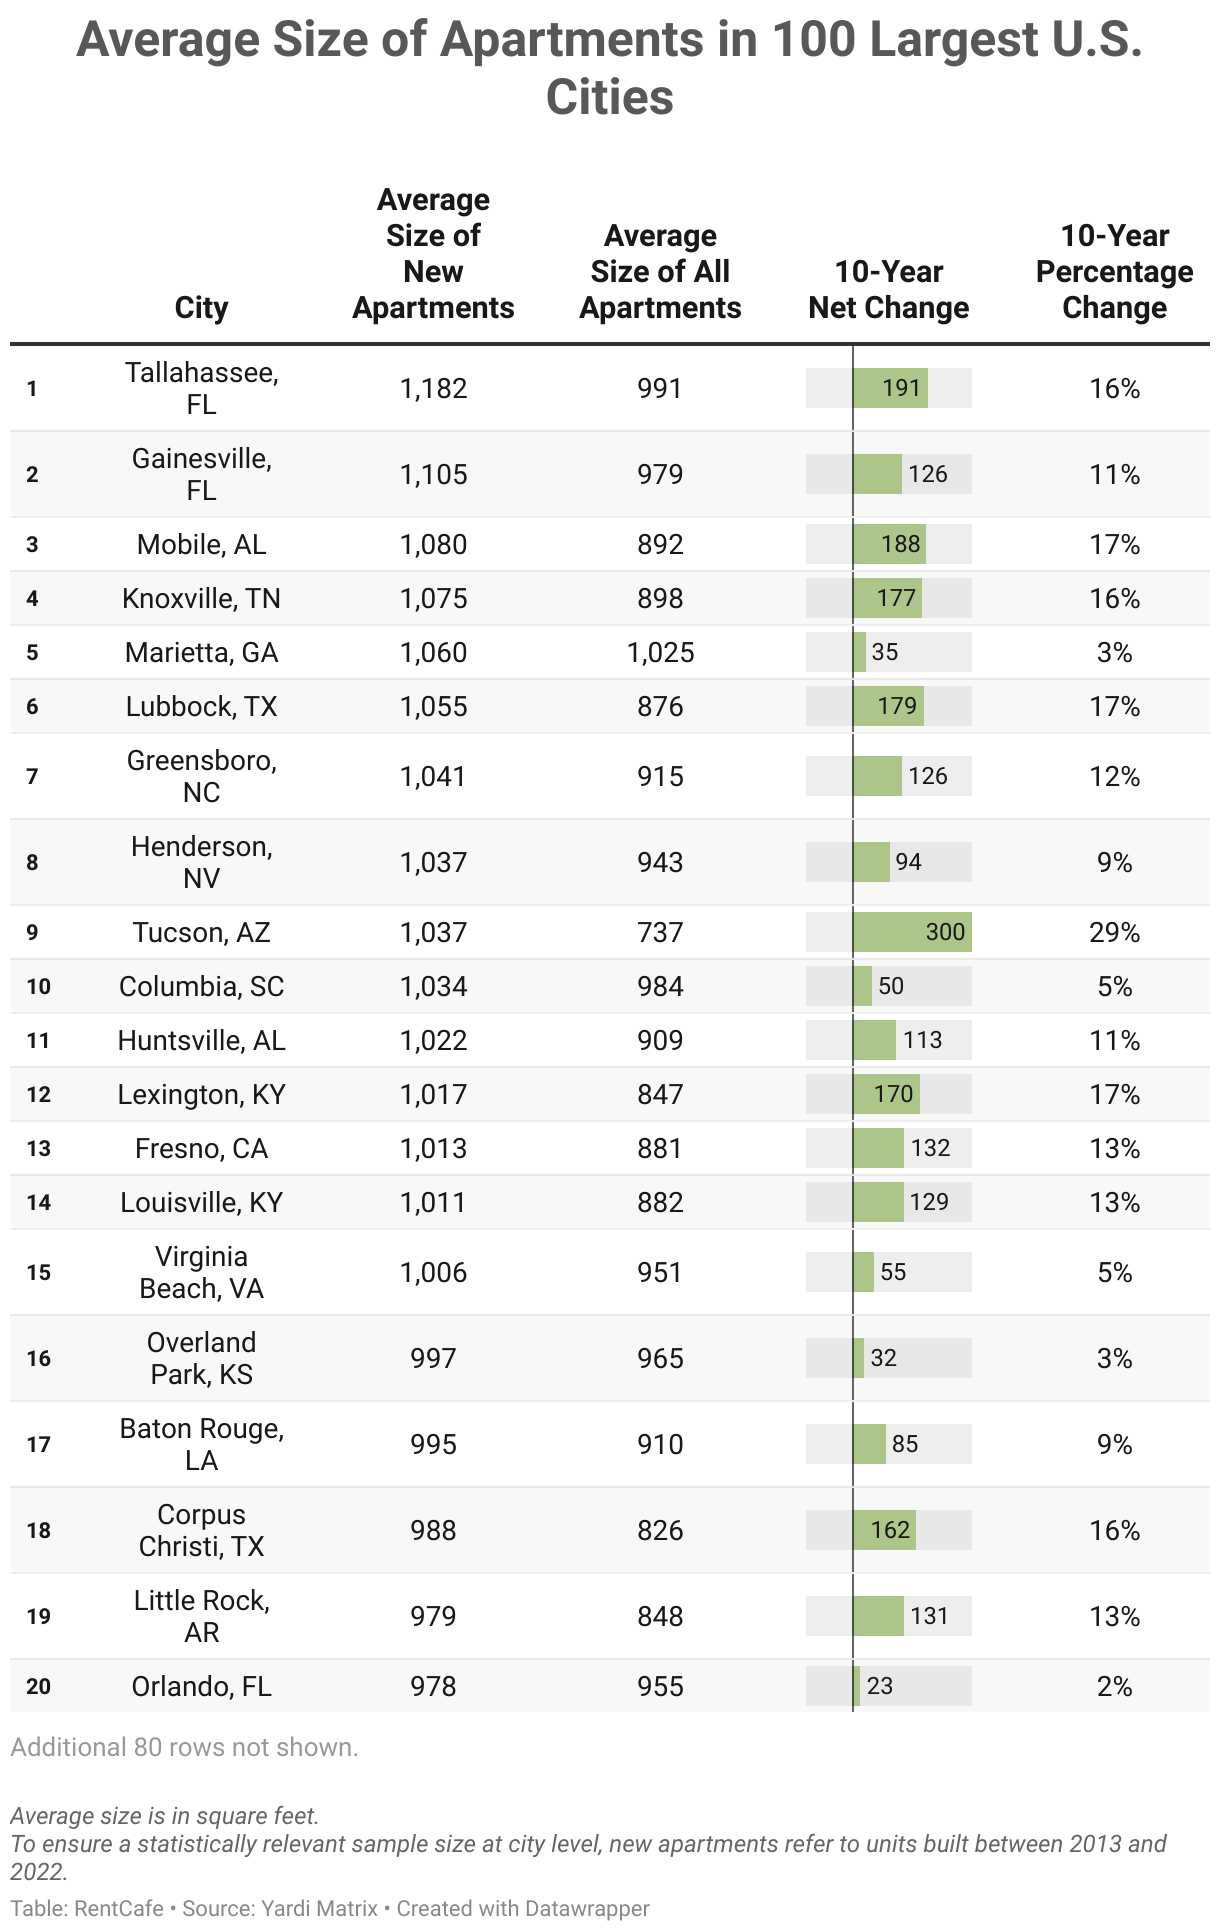 average-size-of-apartments-in-100-largest-u.s.-cities